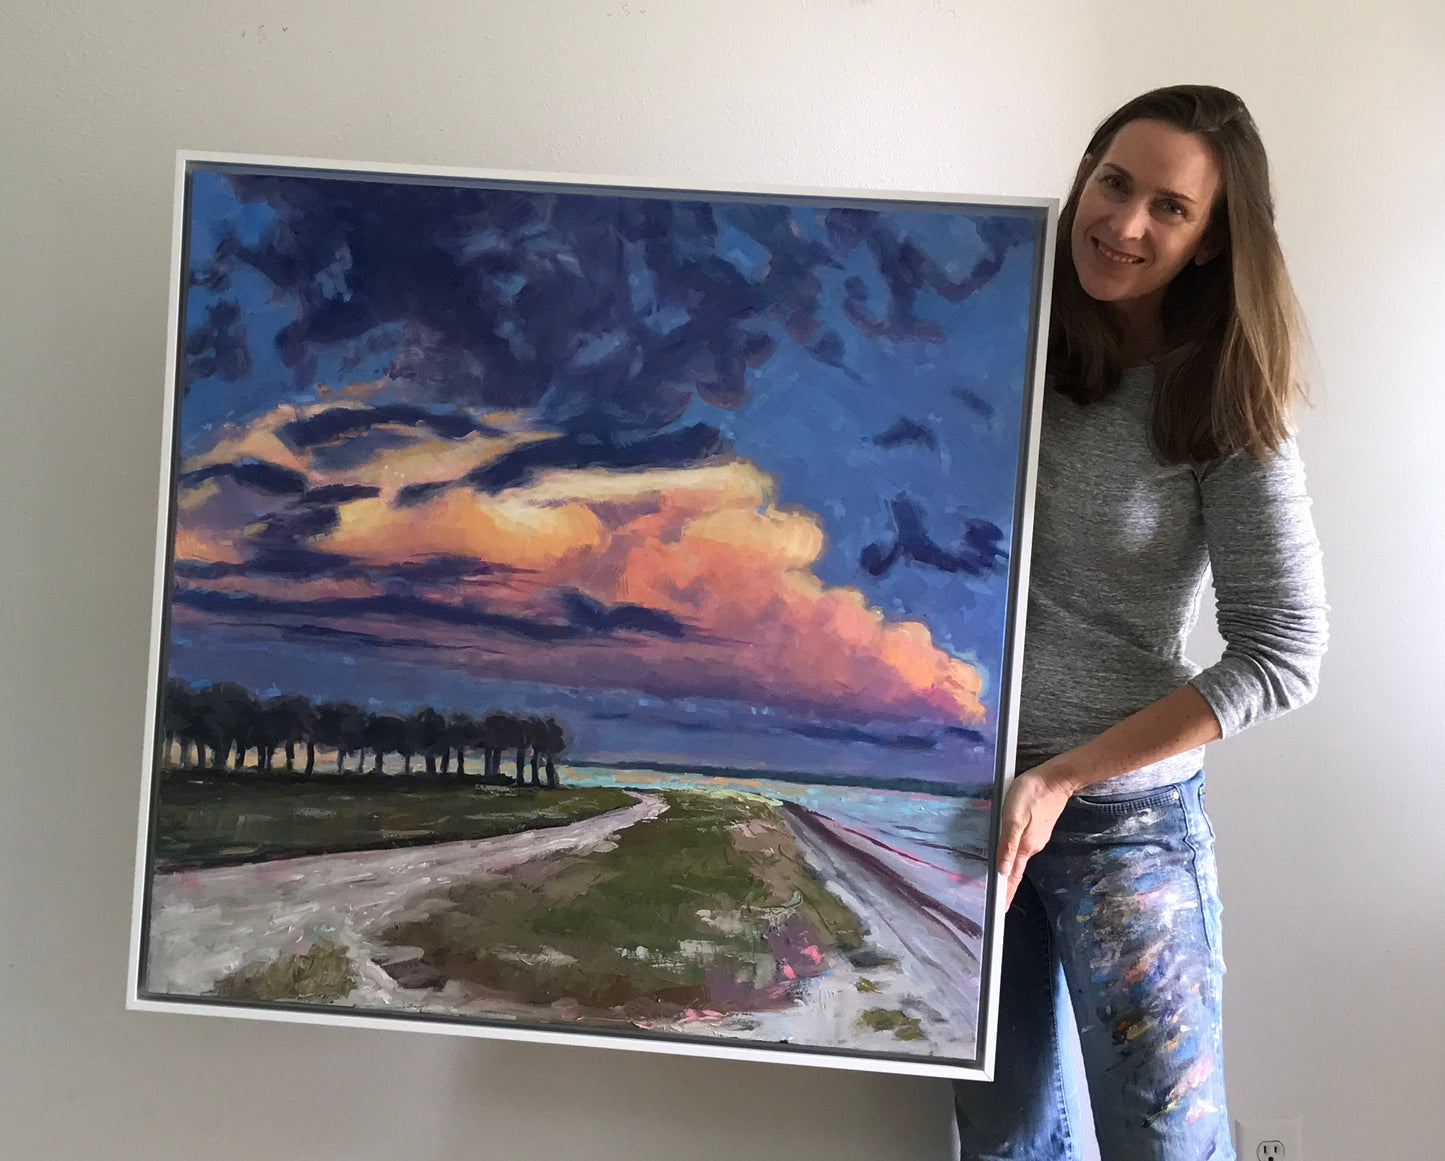 Pink Clouds Over Tampa Bay, 36x36 inches with frame